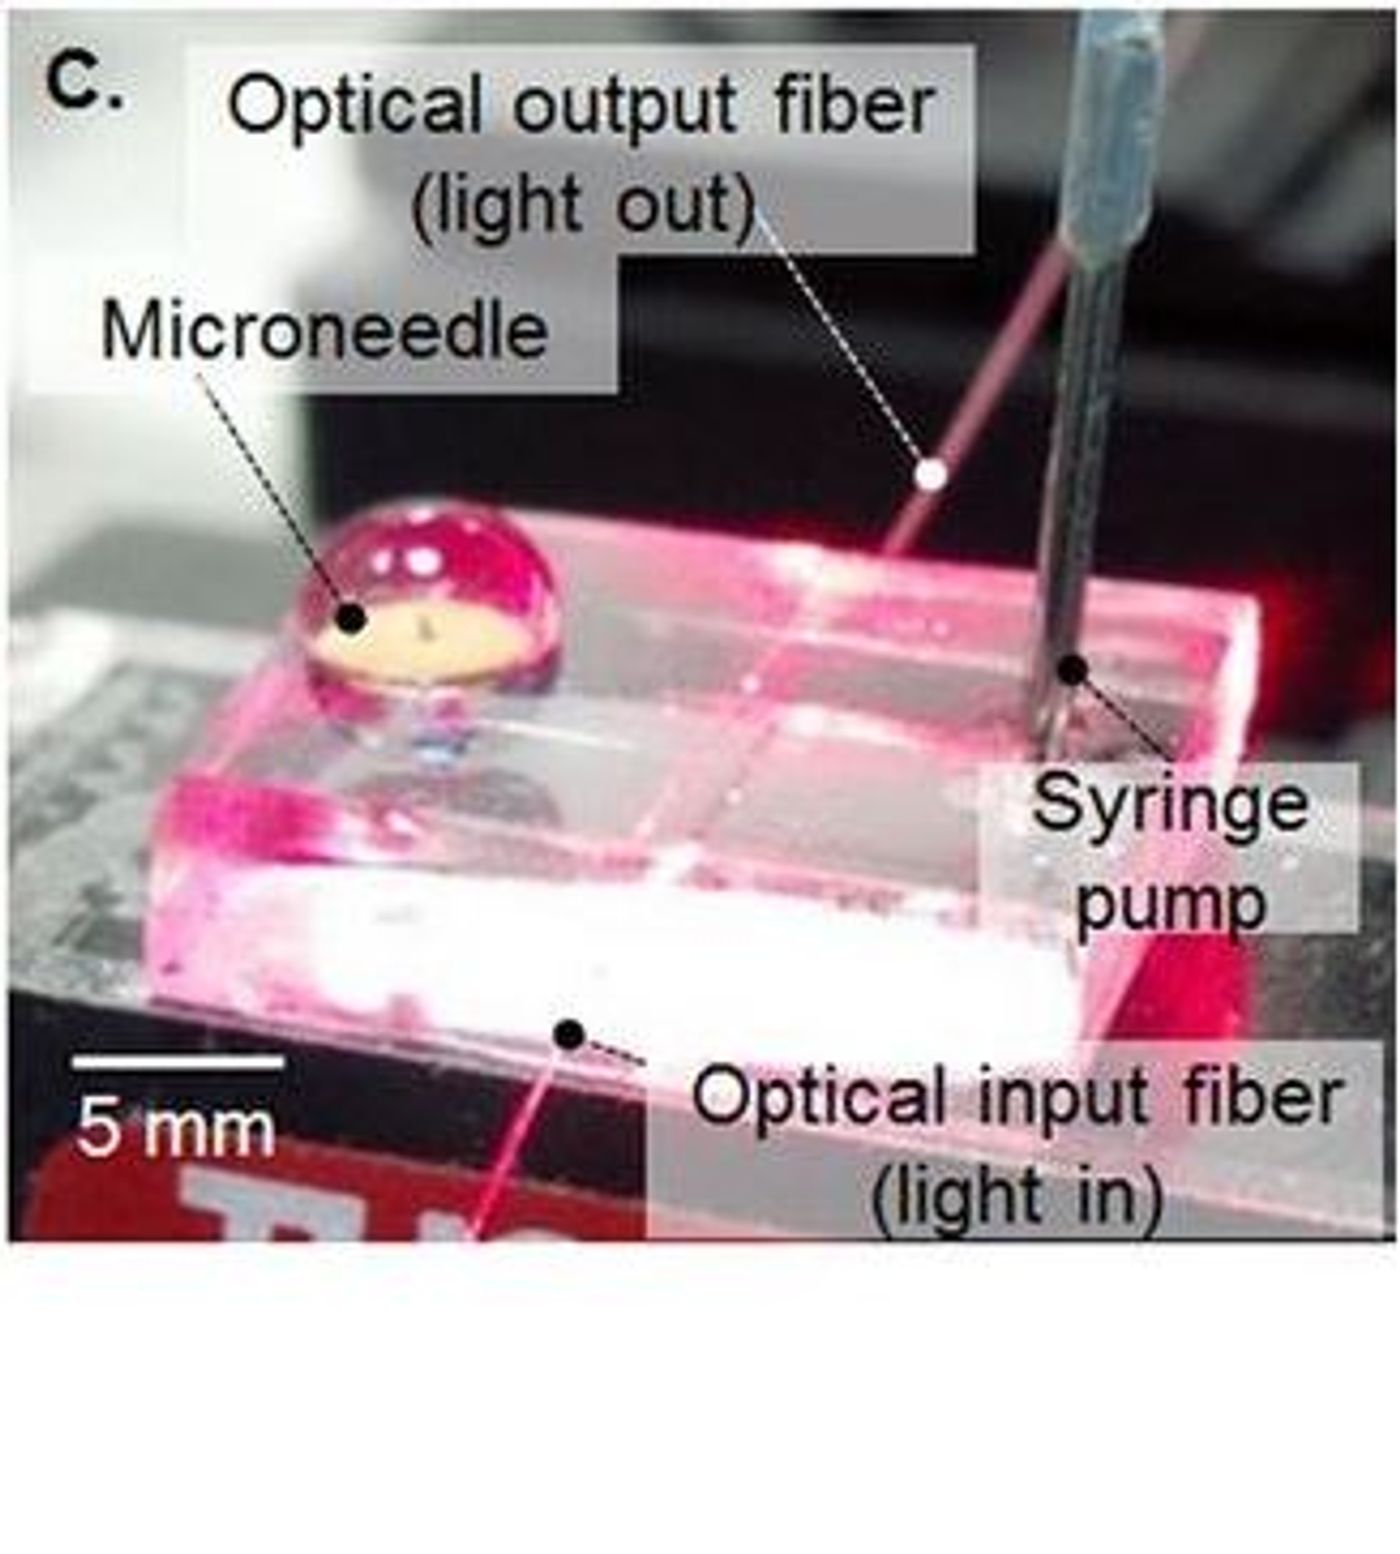 An image of the integrated microneedle-optofluidic device. For full explanation, see Figure 1 in Ranamukhaarachchi et al. 2016.